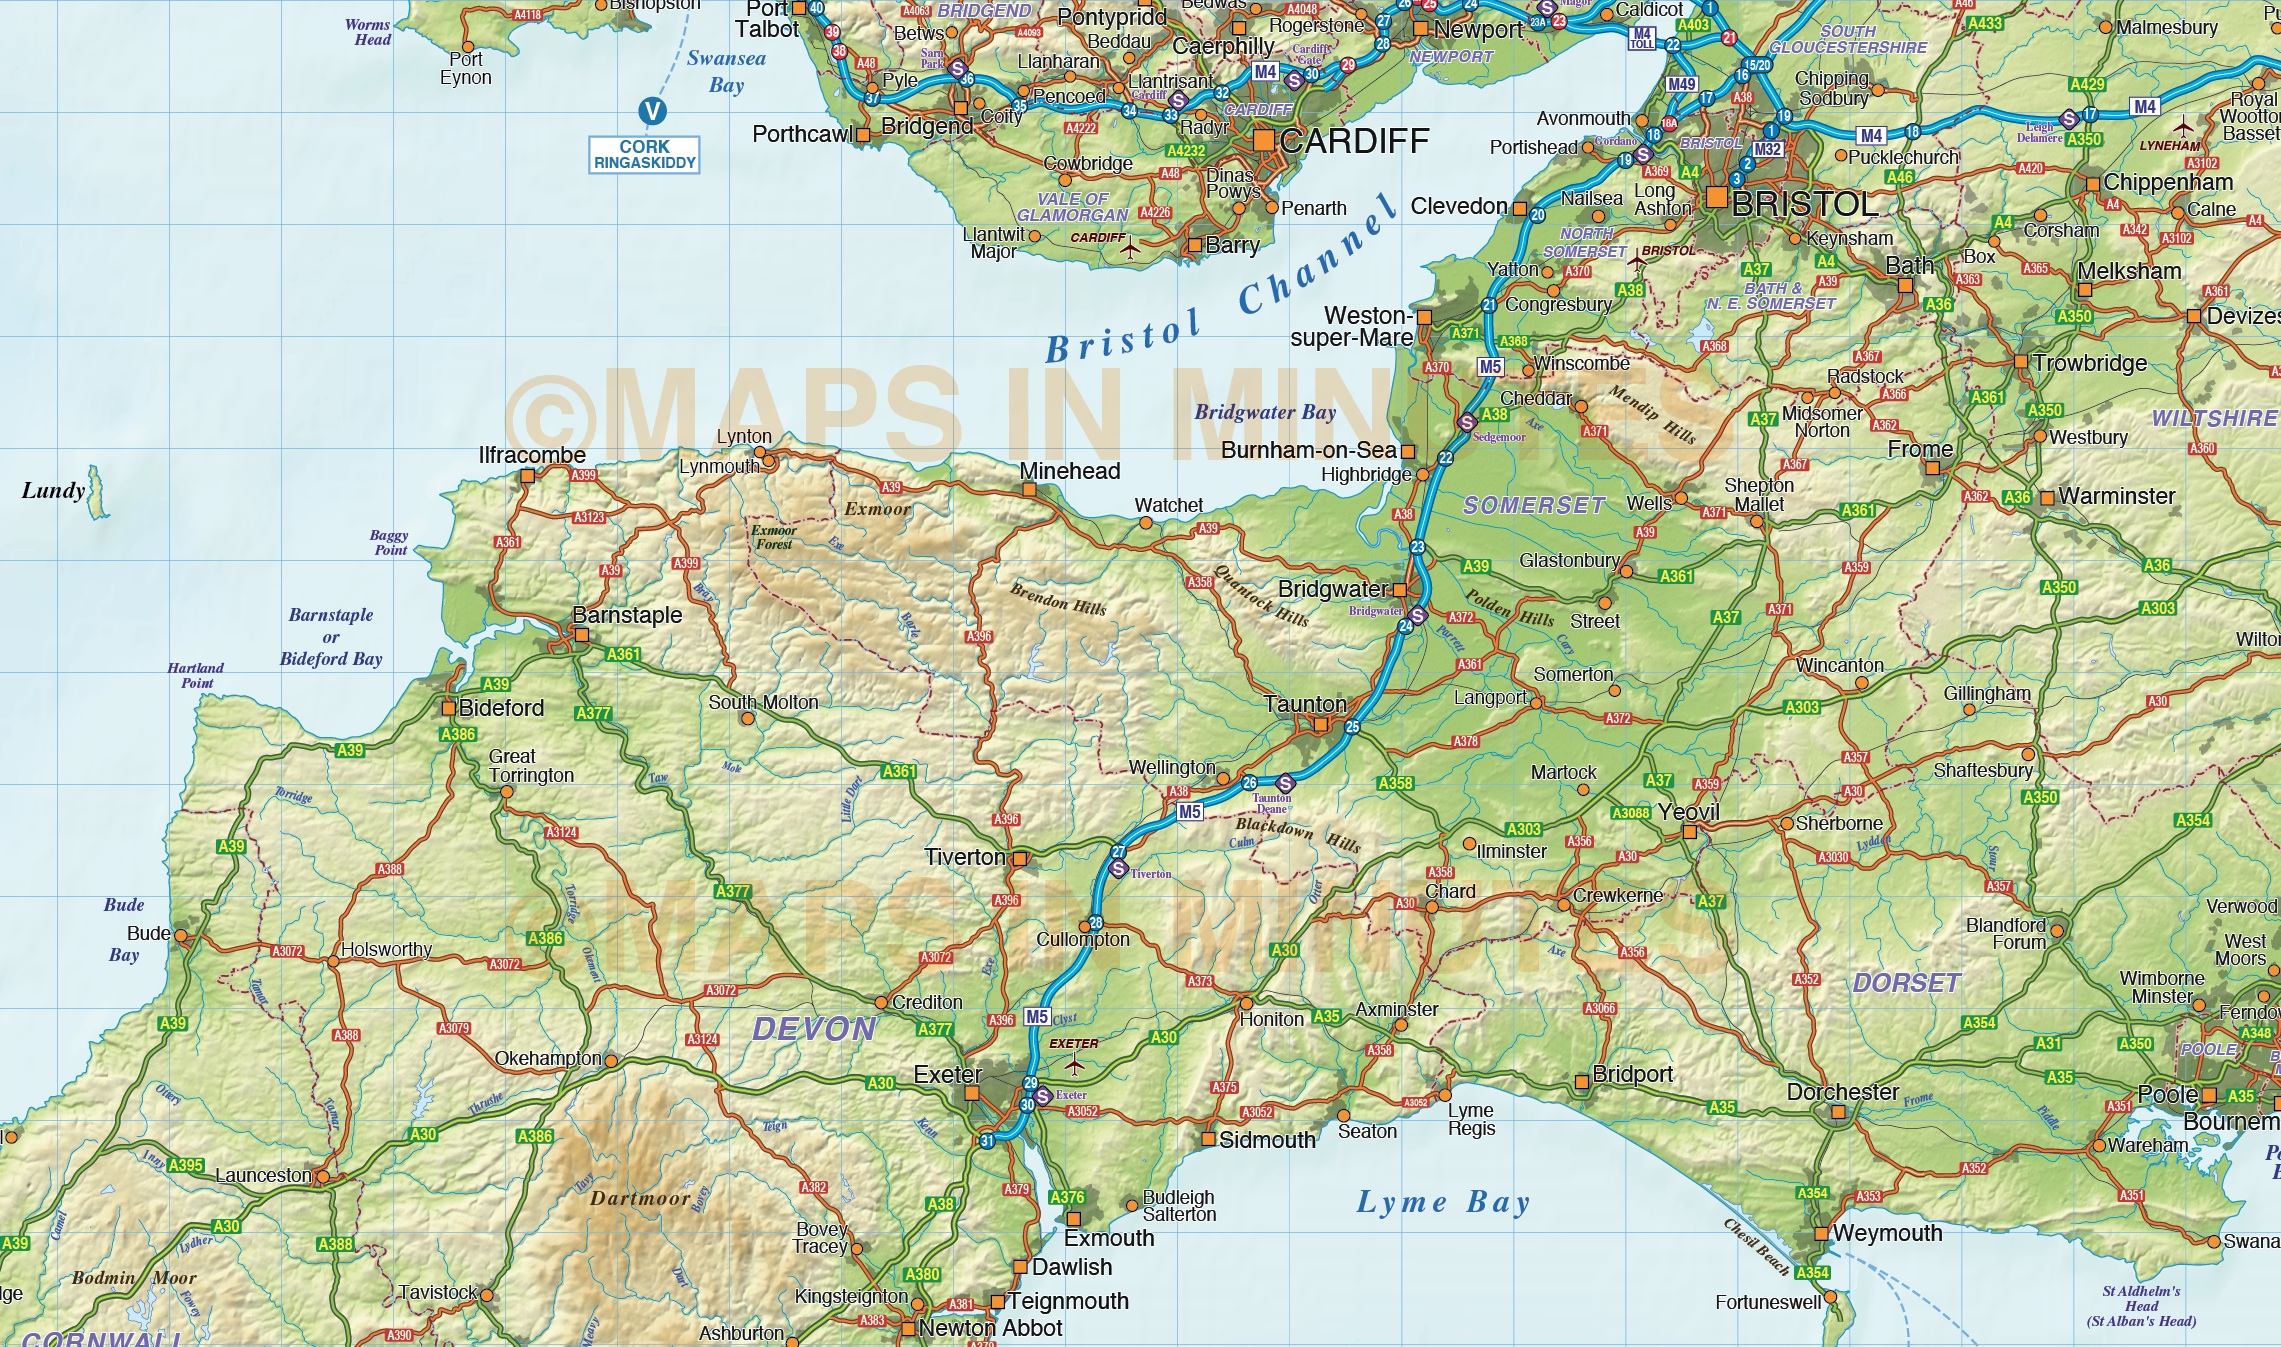 south-west-england-county-road-rail-map-with-regular-relief-1m-scale